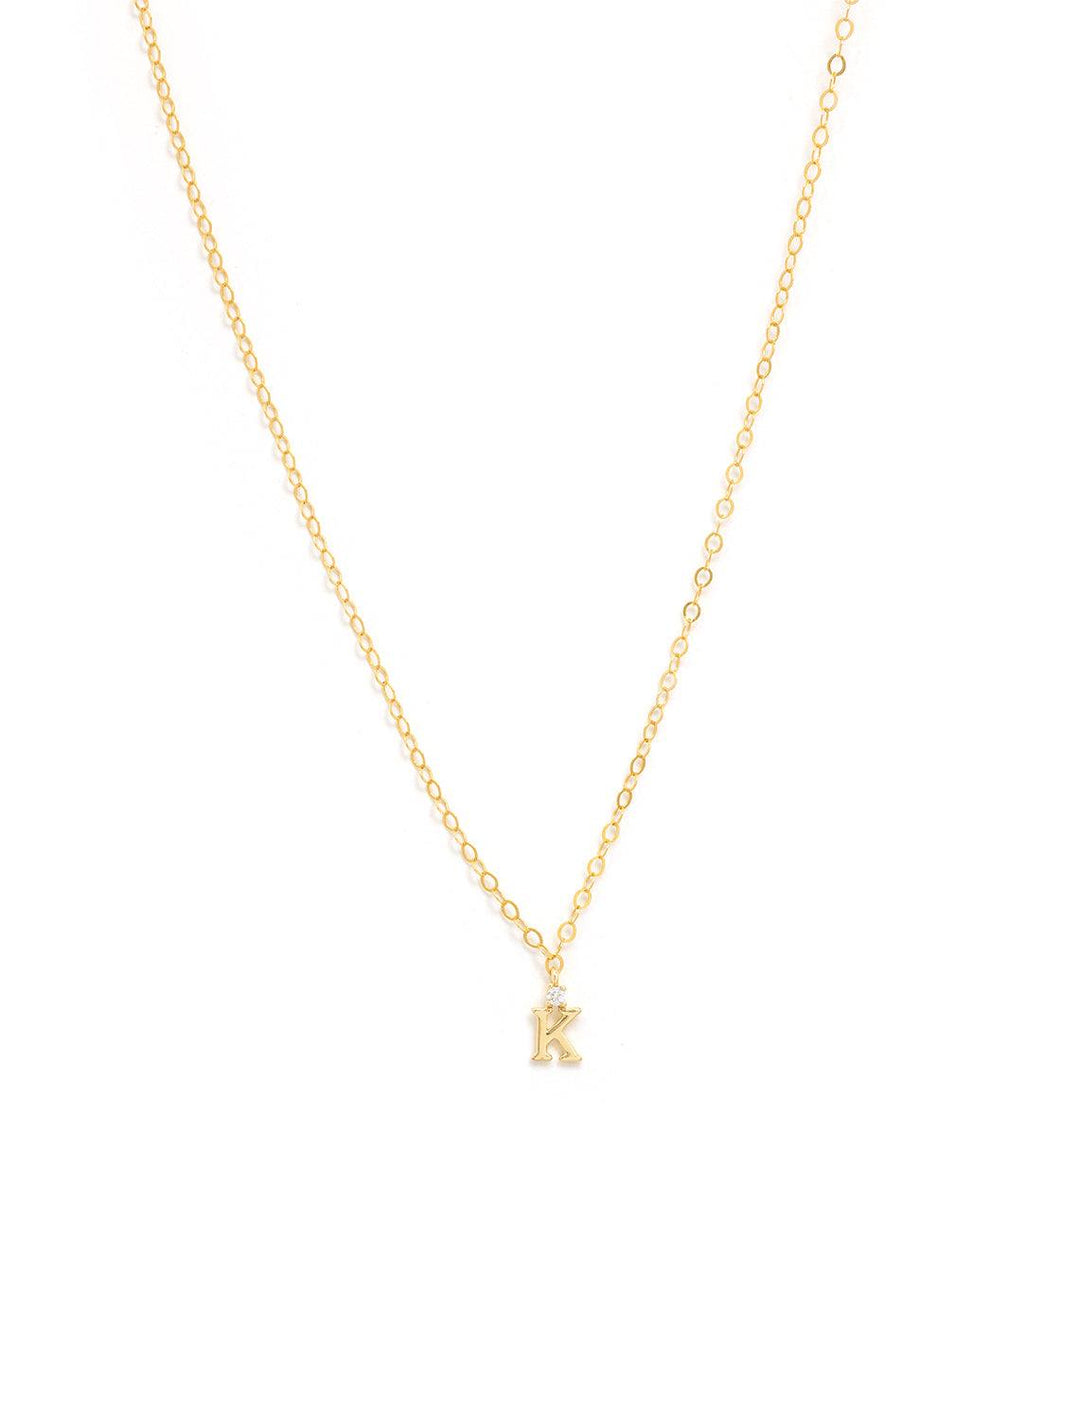 Marit Rae initial and cz necklace in gold | K - Twigs